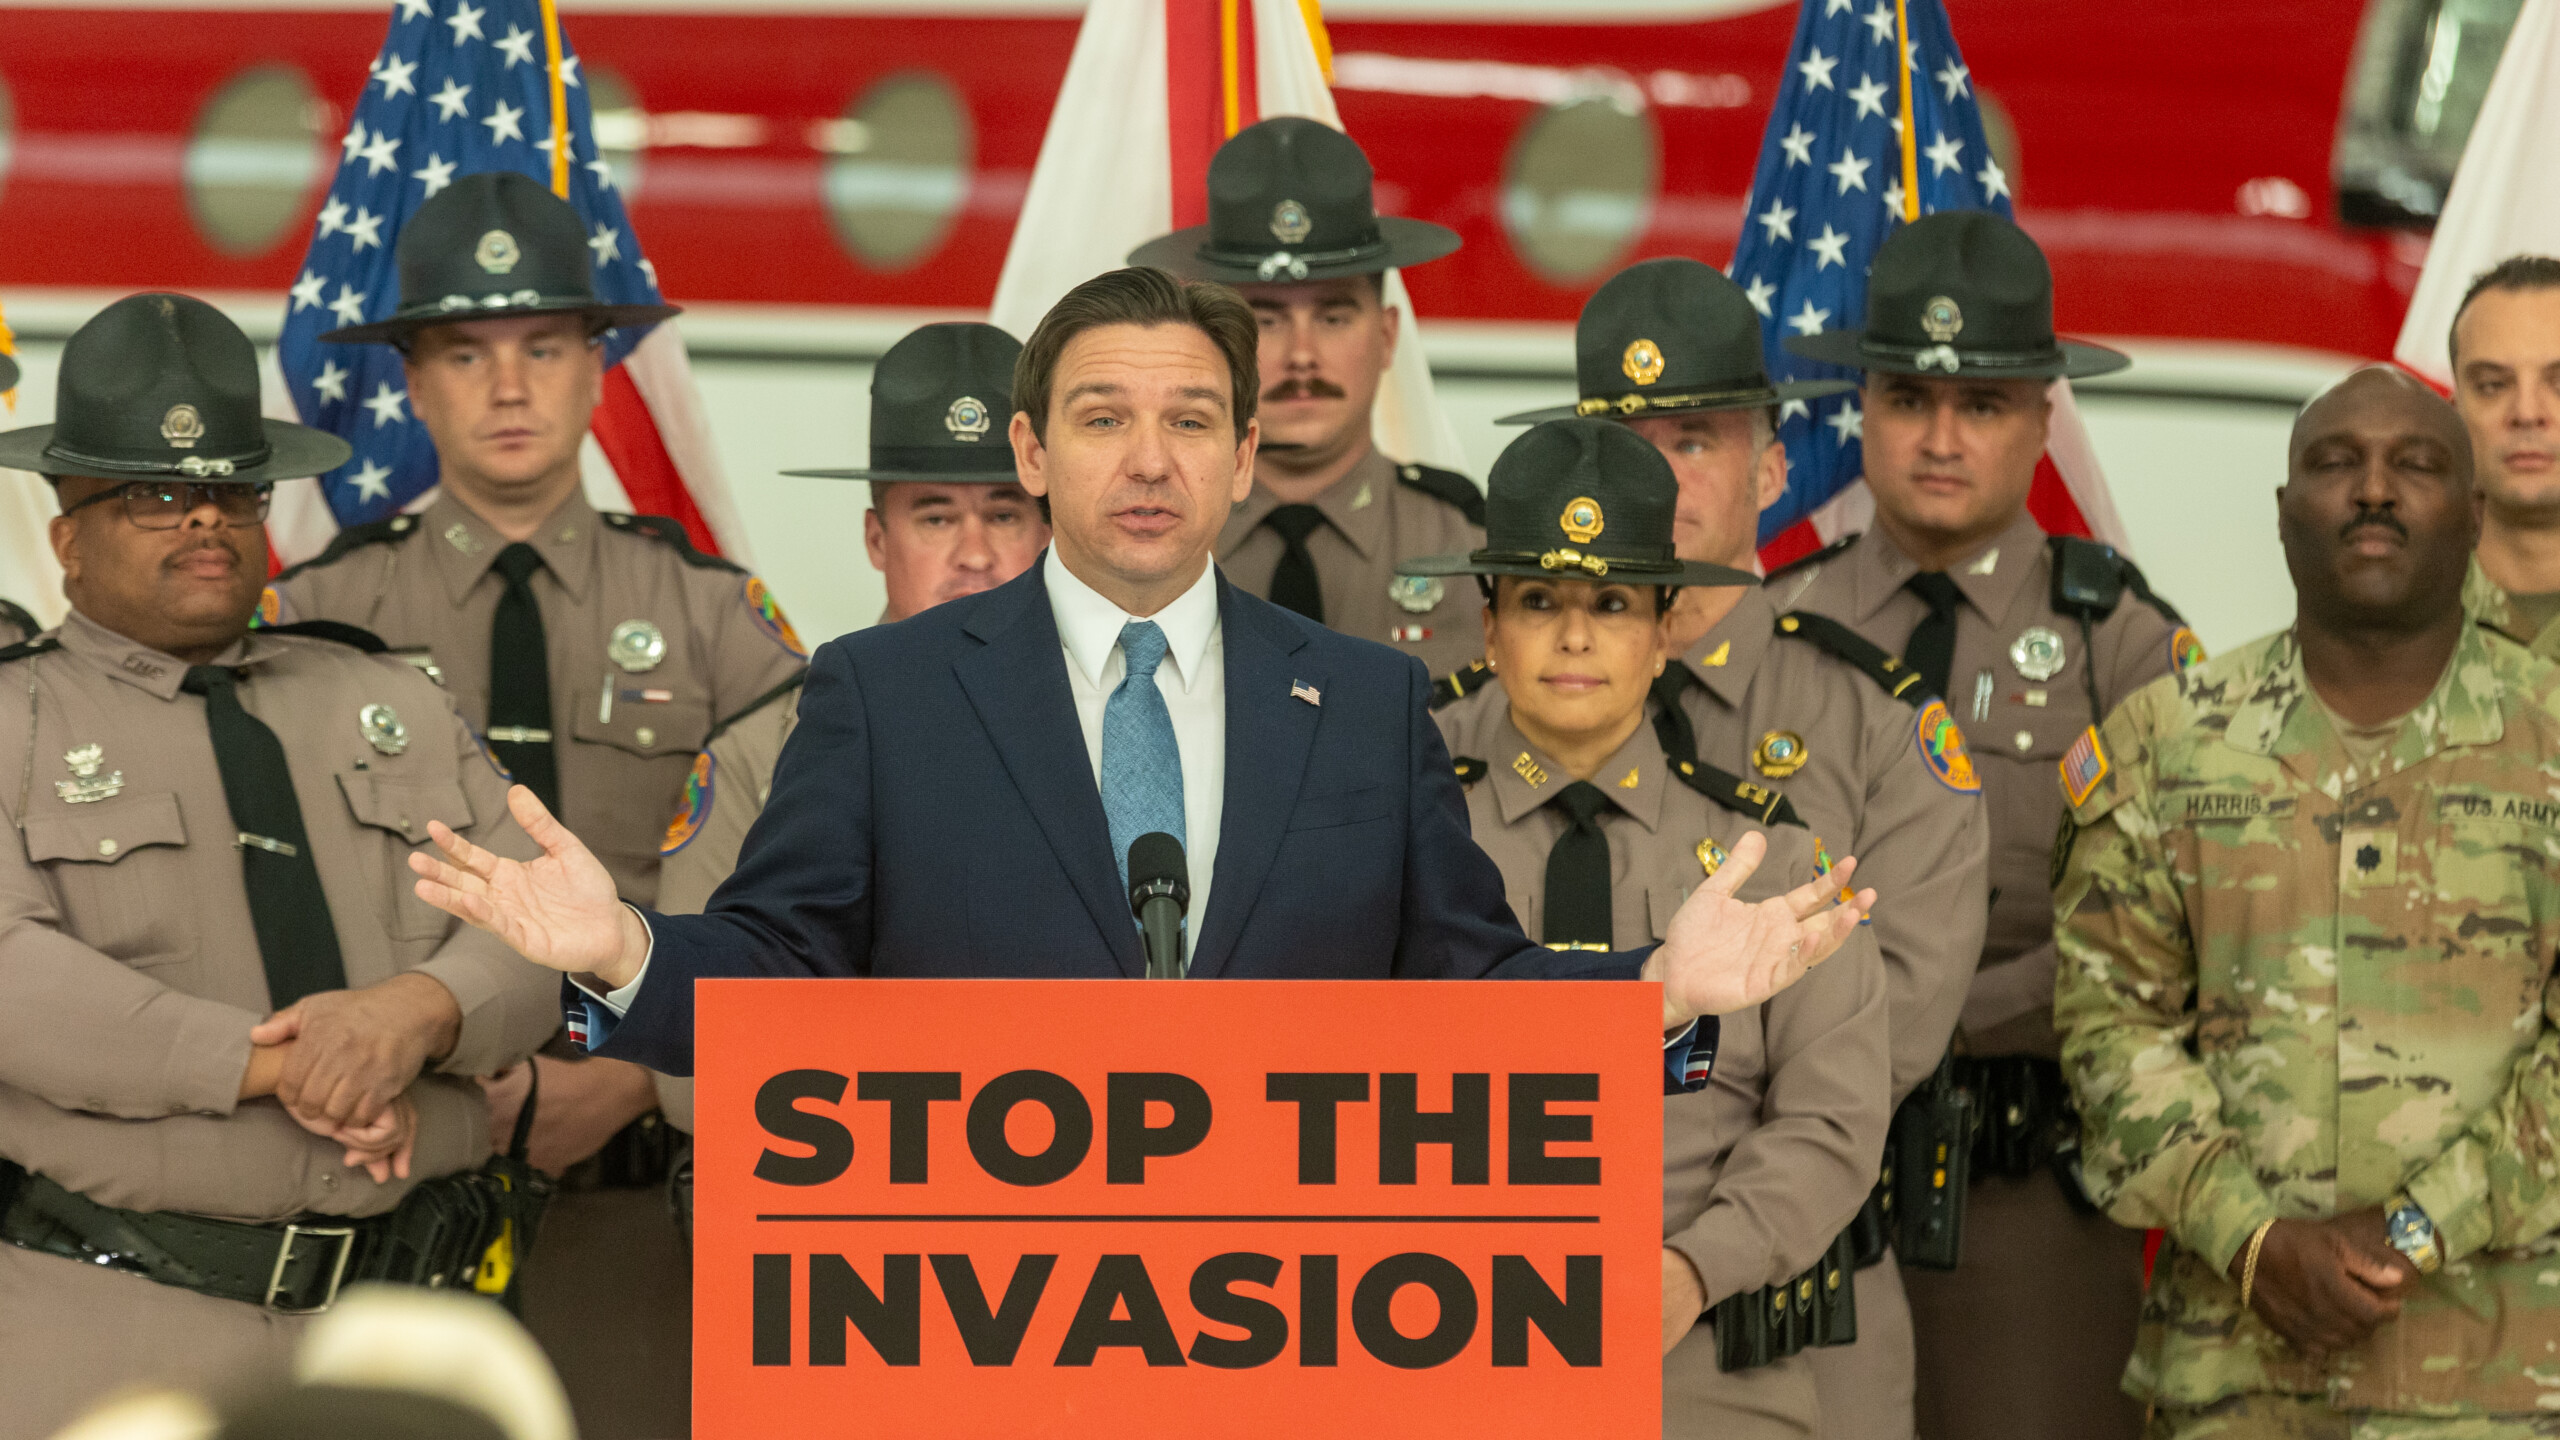 Featured image for “DeSantis is sending Florida State Guard to southern border”